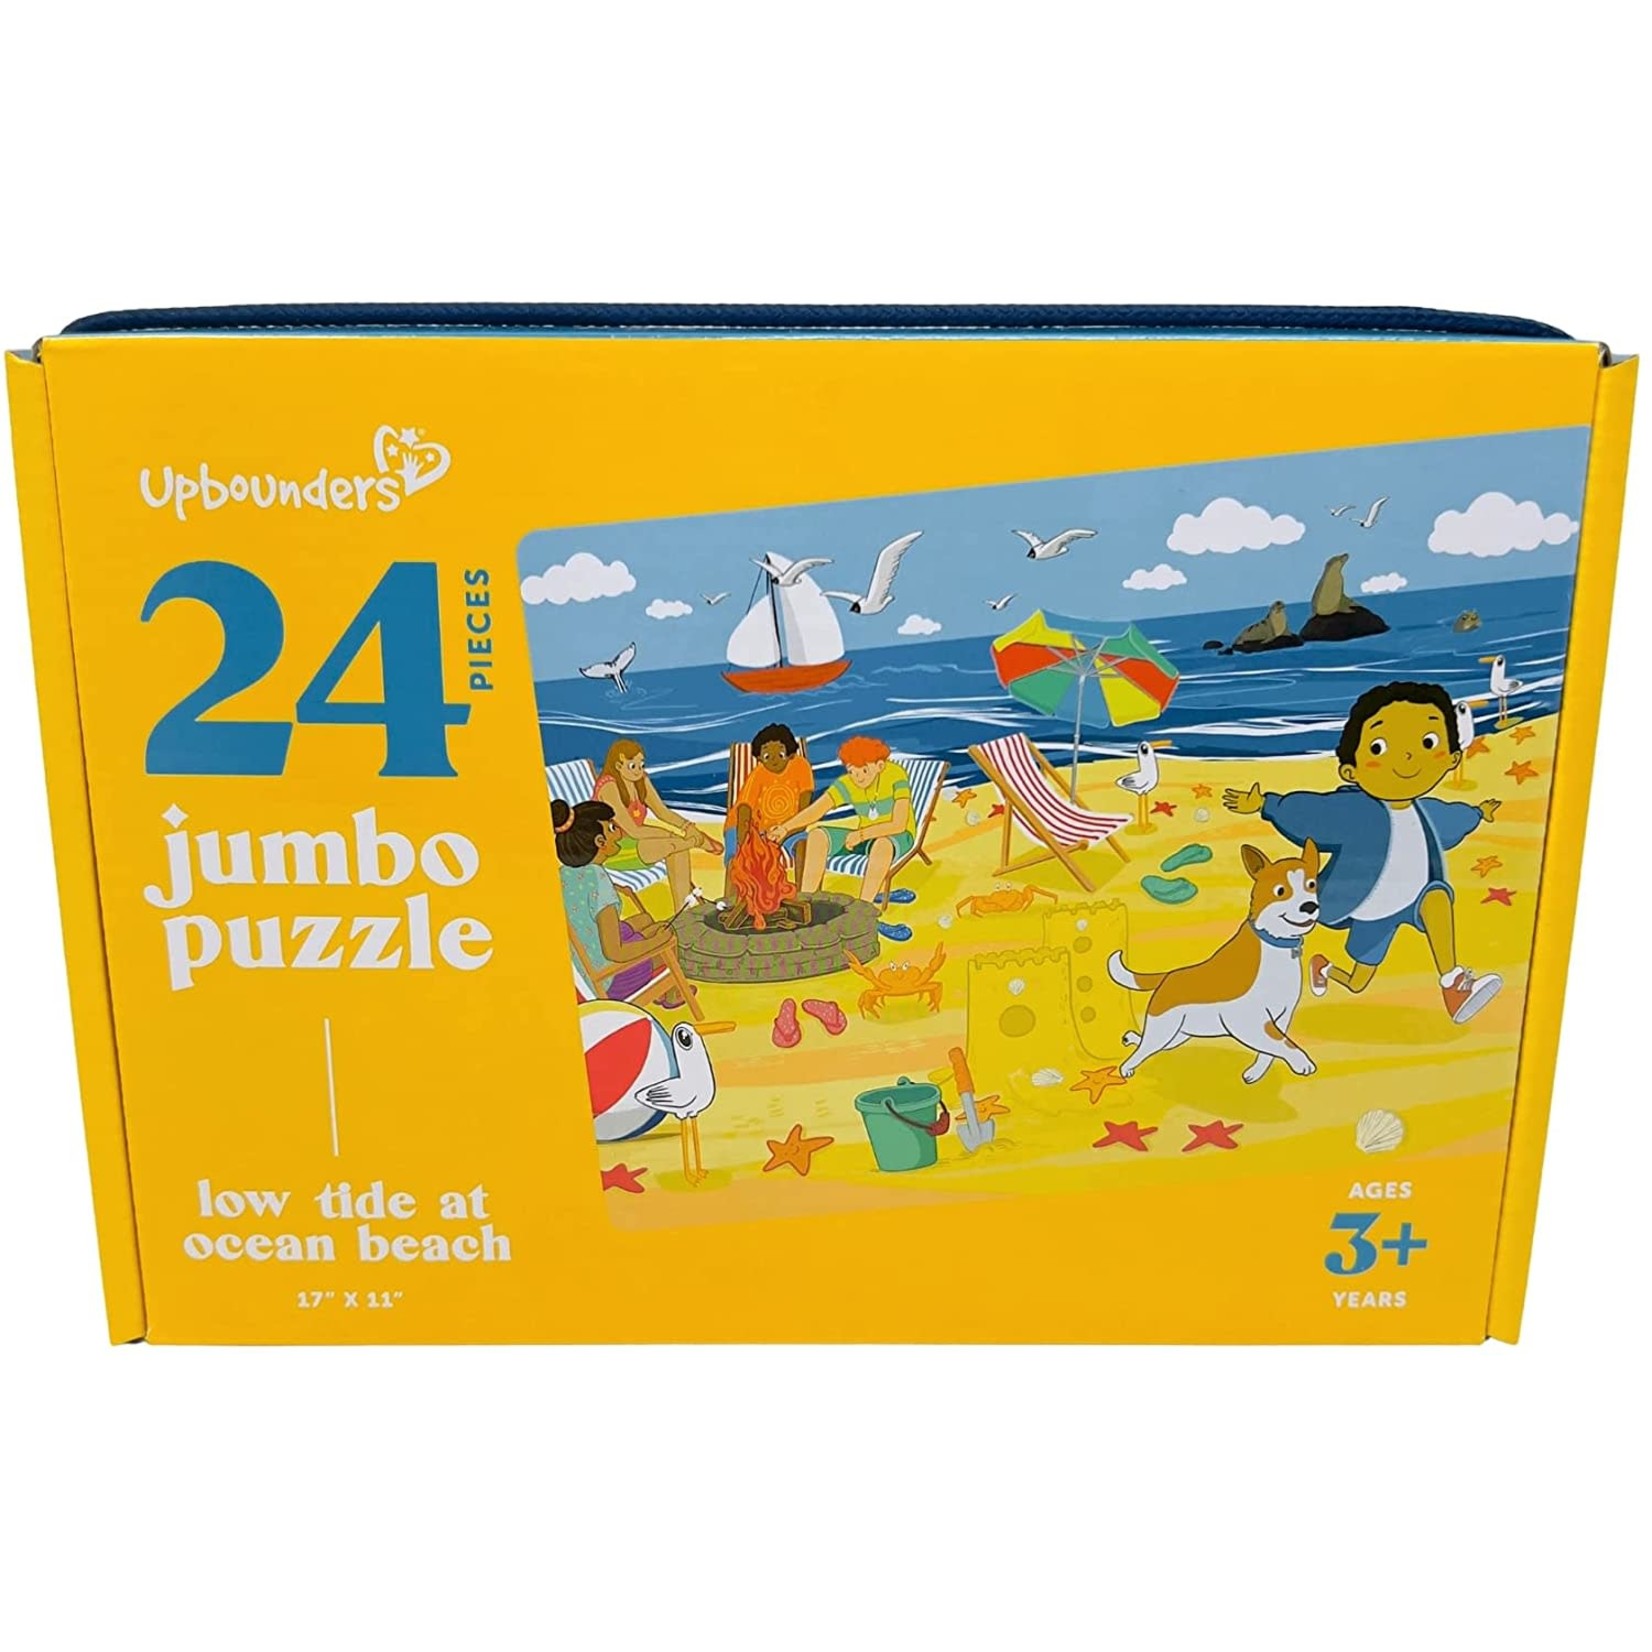 Upbounders Low Tide at Ocean Beach, 24-Piece Jigsaw Puzzle (Jumbo)